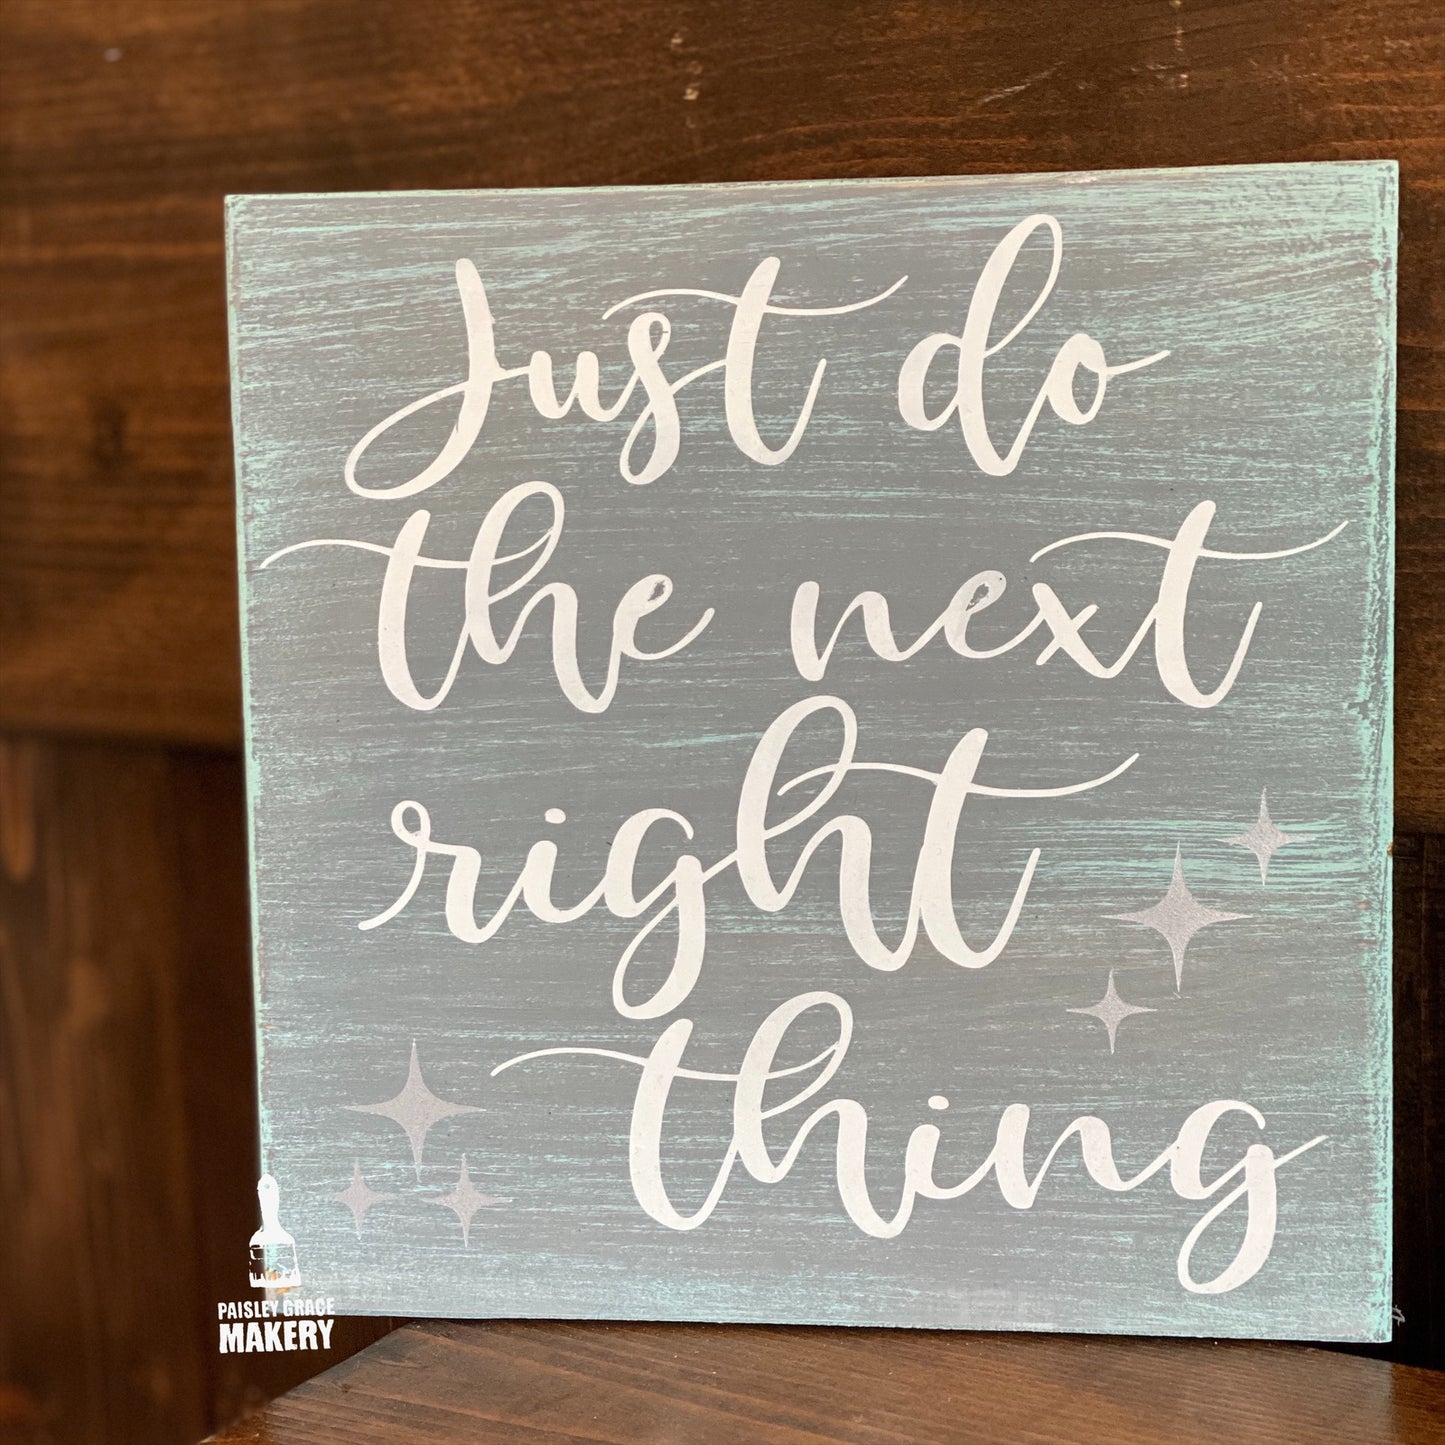 Just do the next right thing: MINI DESIGN - Paisley Grace Makery